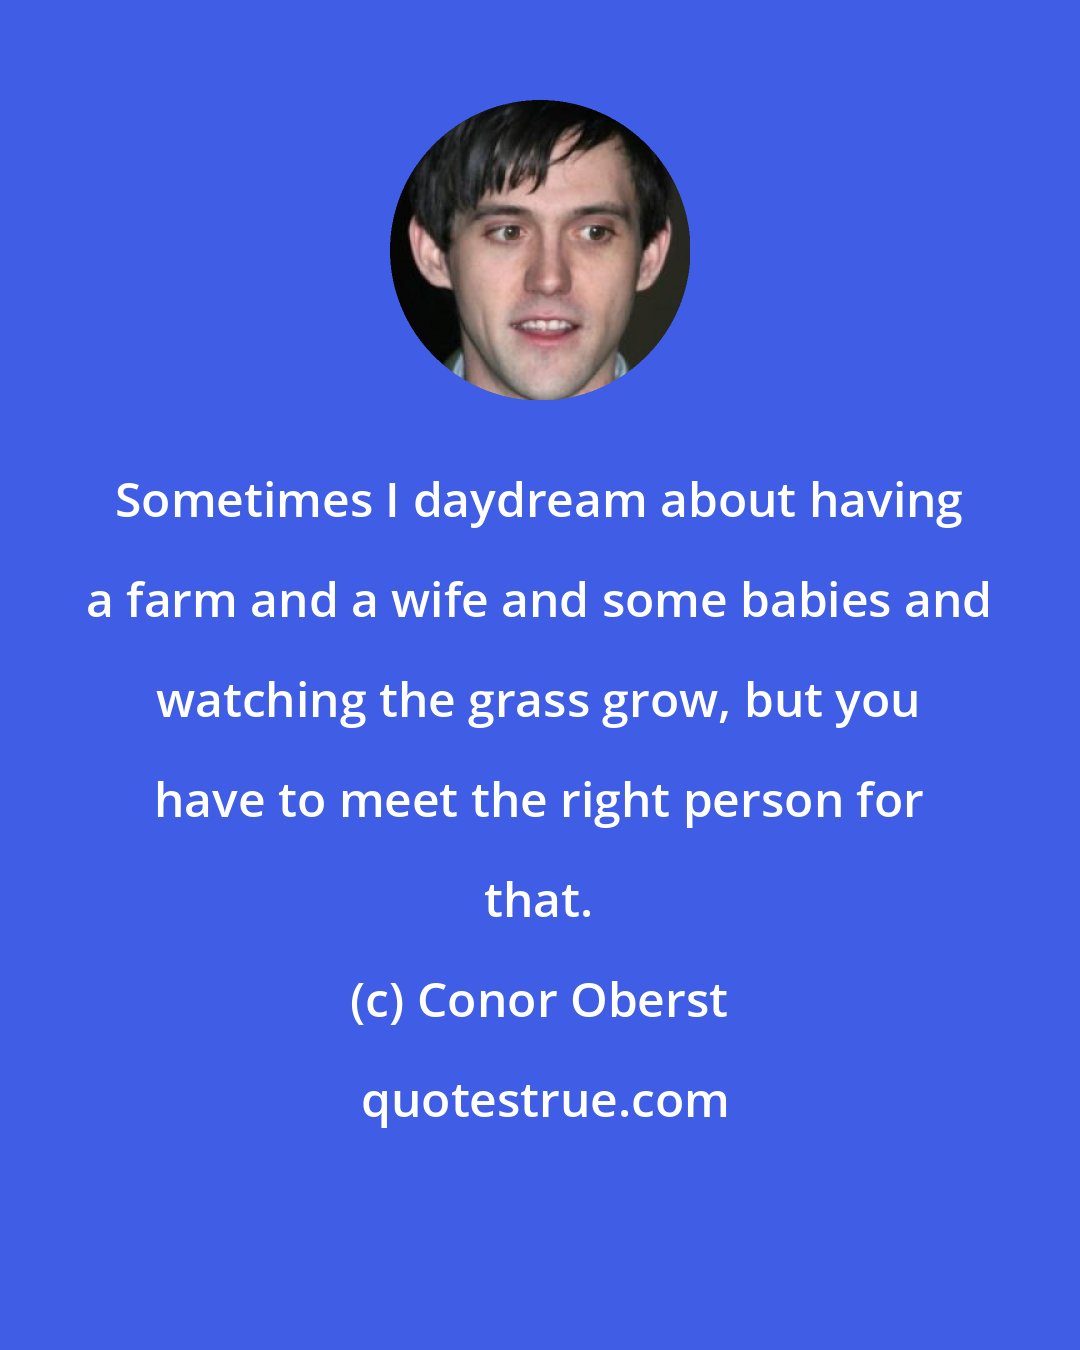 Conor Oberst: Sometimes I daydream about having a farm and a wife and some babies and watching the grass grow, but you have to meet the right person for that.